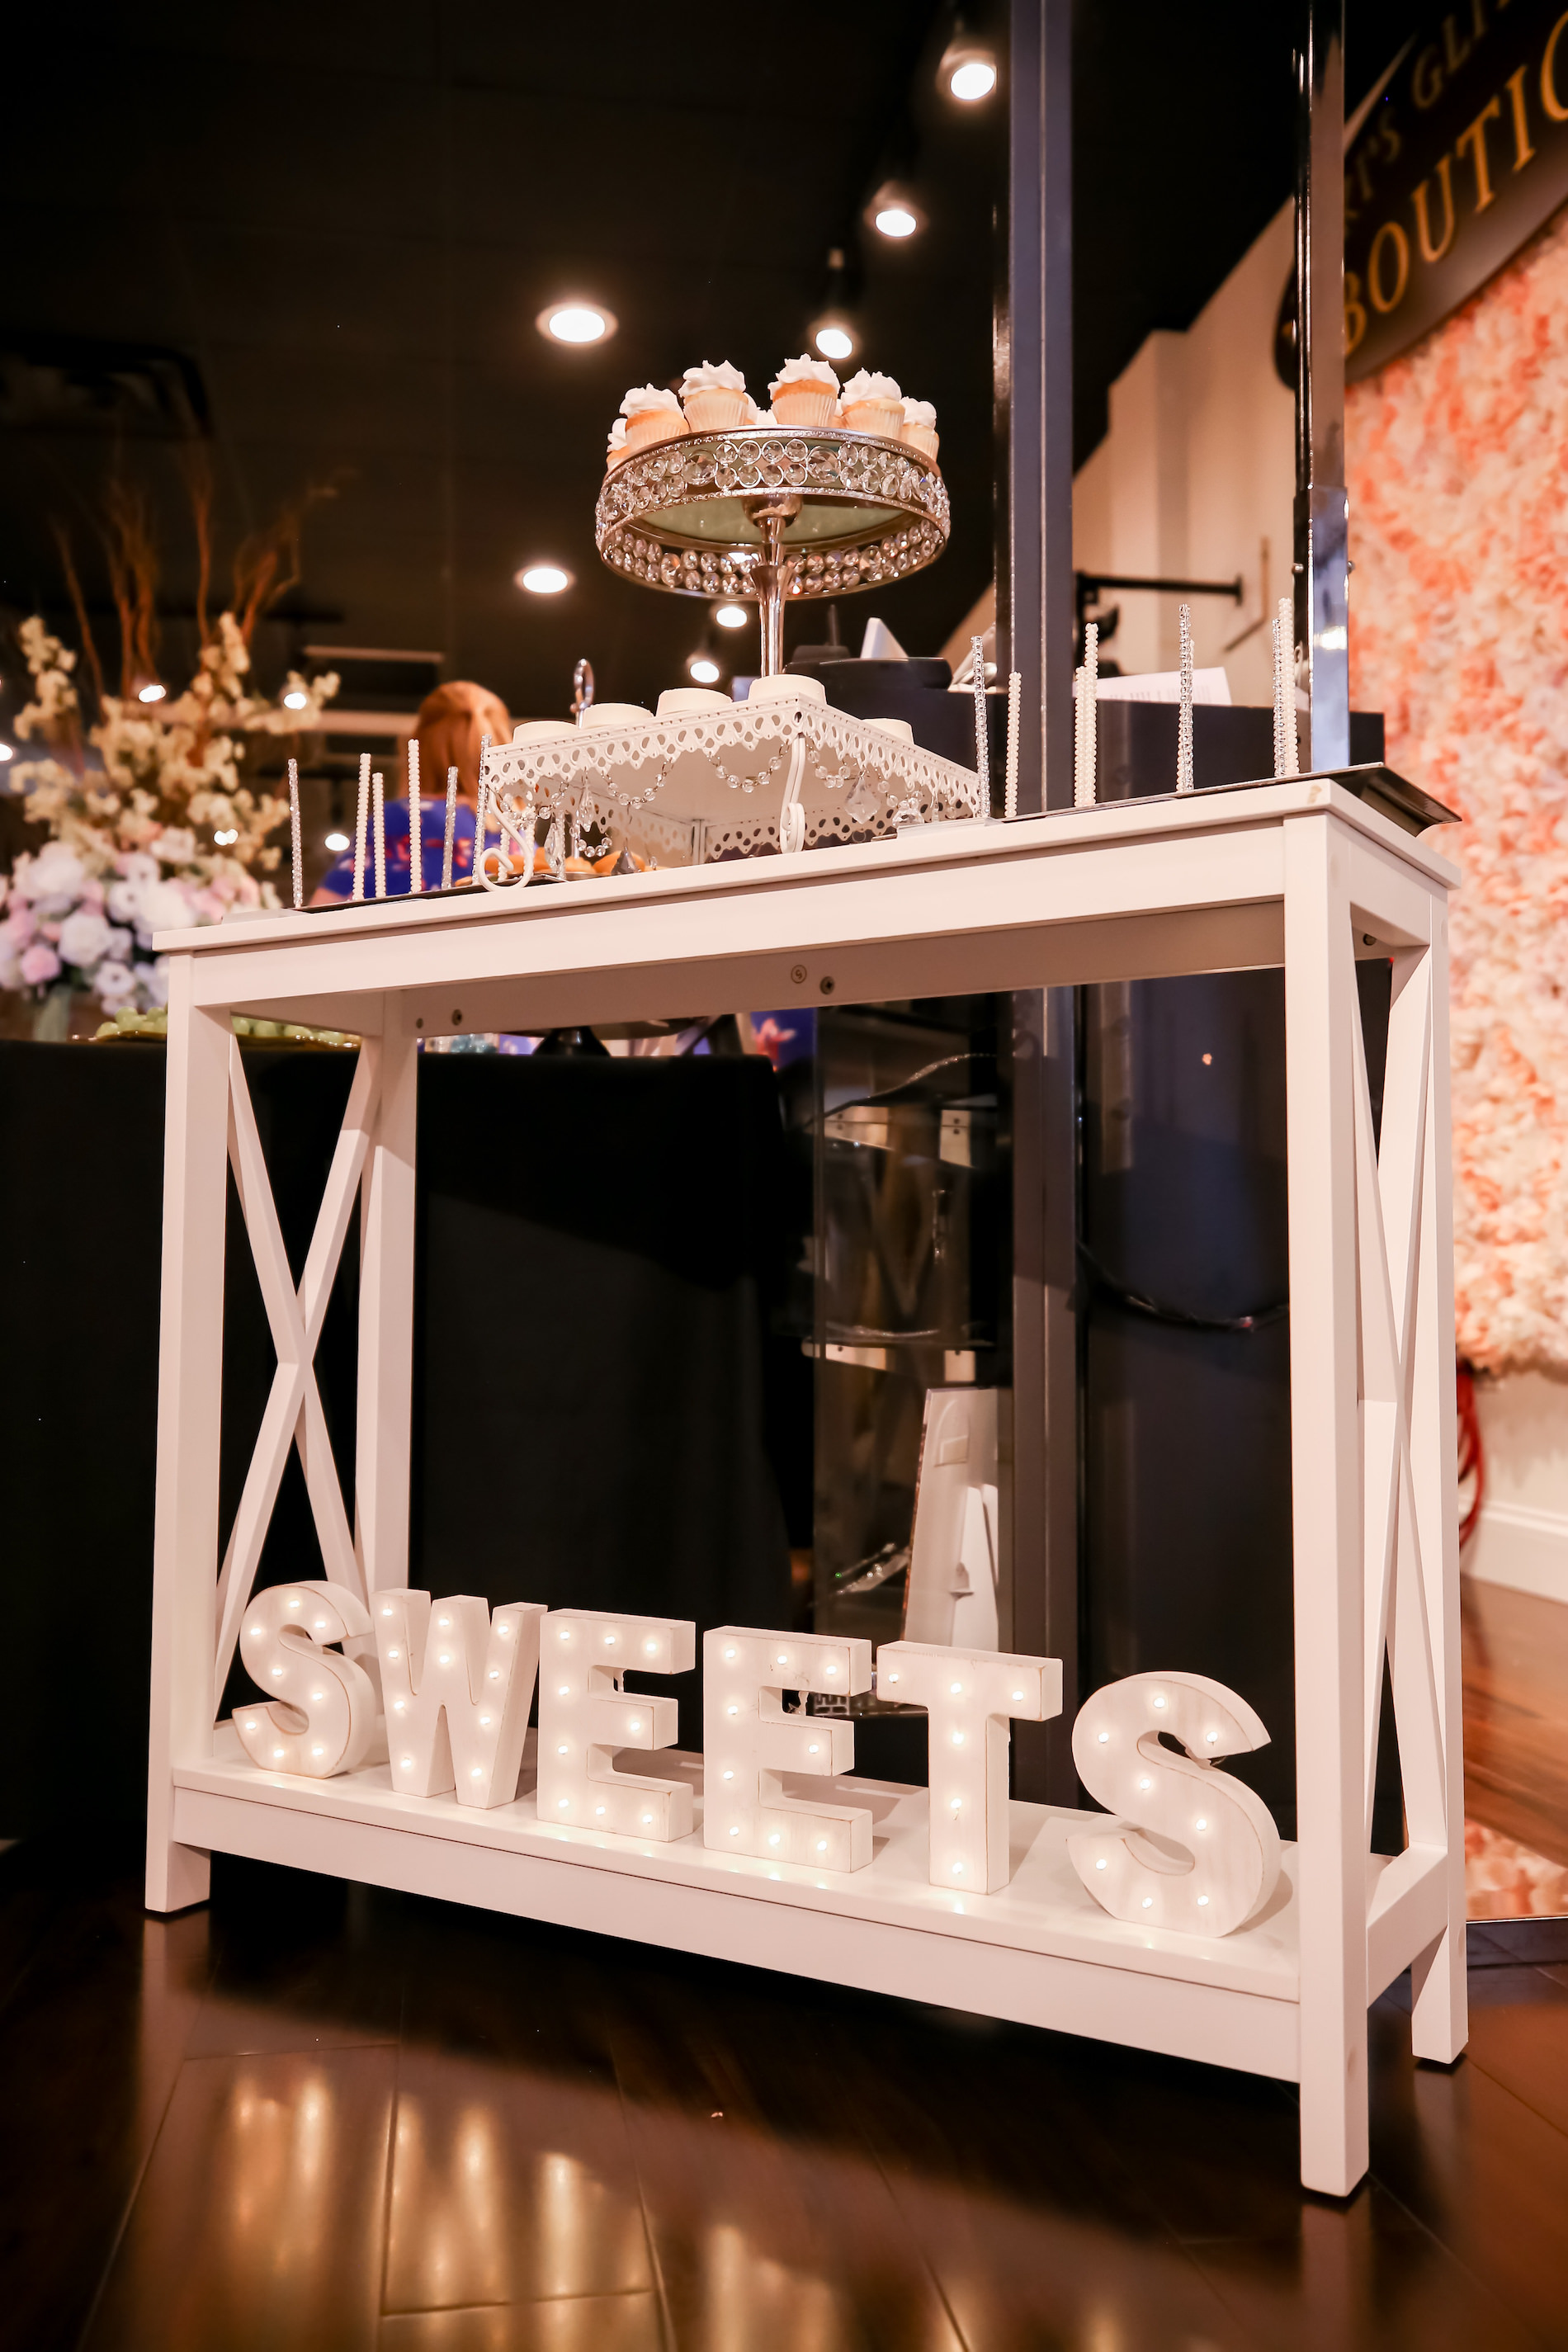 Marry Me Tampa Bay Before 5 | Pop Goes the Party Wedding Dessert and Cake Pop Display